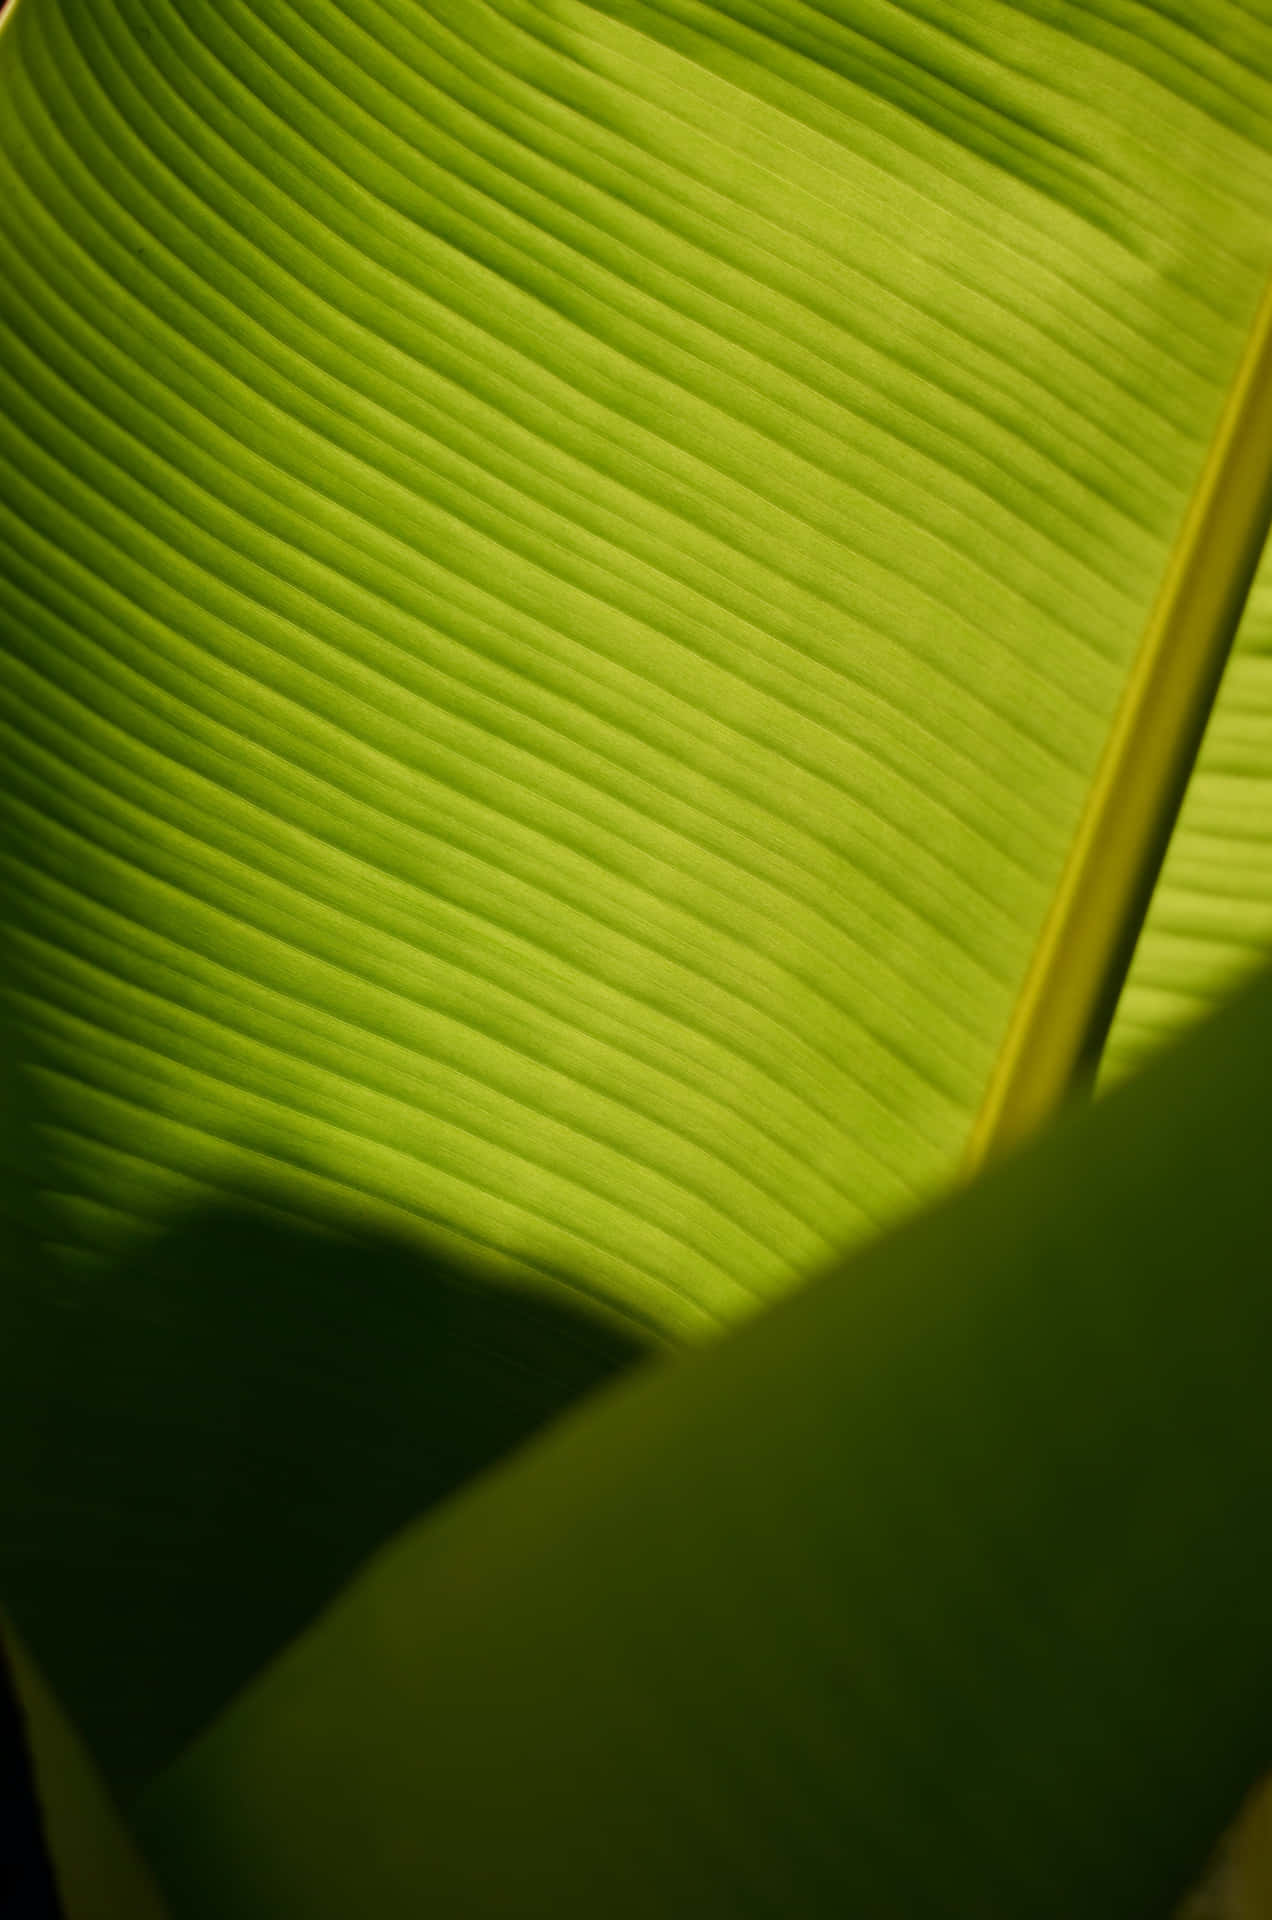 Bananas Growing on a Leafy Background